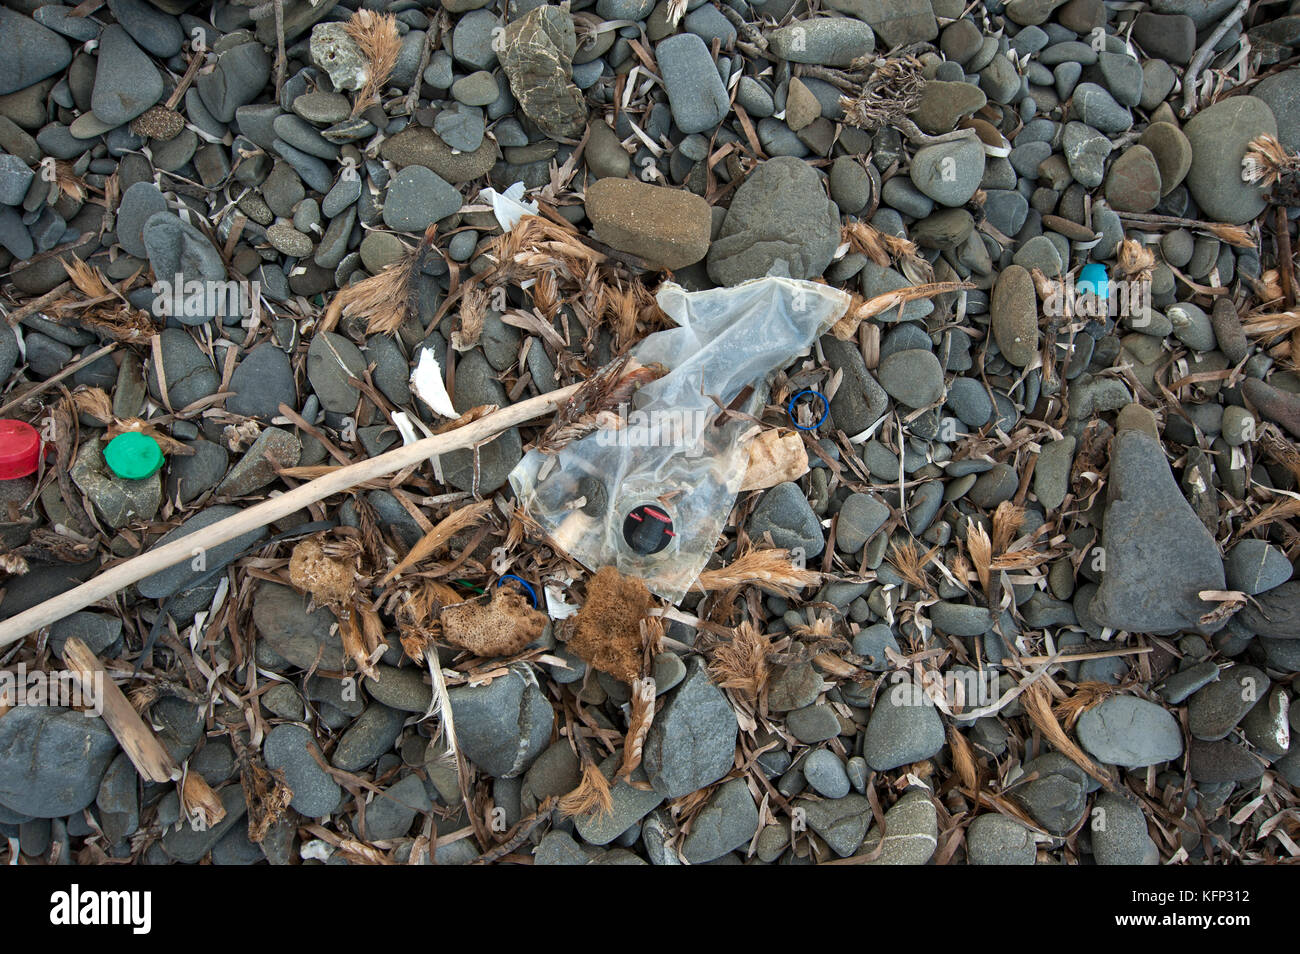 A plastic wine bag and other plastic items washed up on a pebble beach on the island of Menorca in the mediterranean Stock Photo